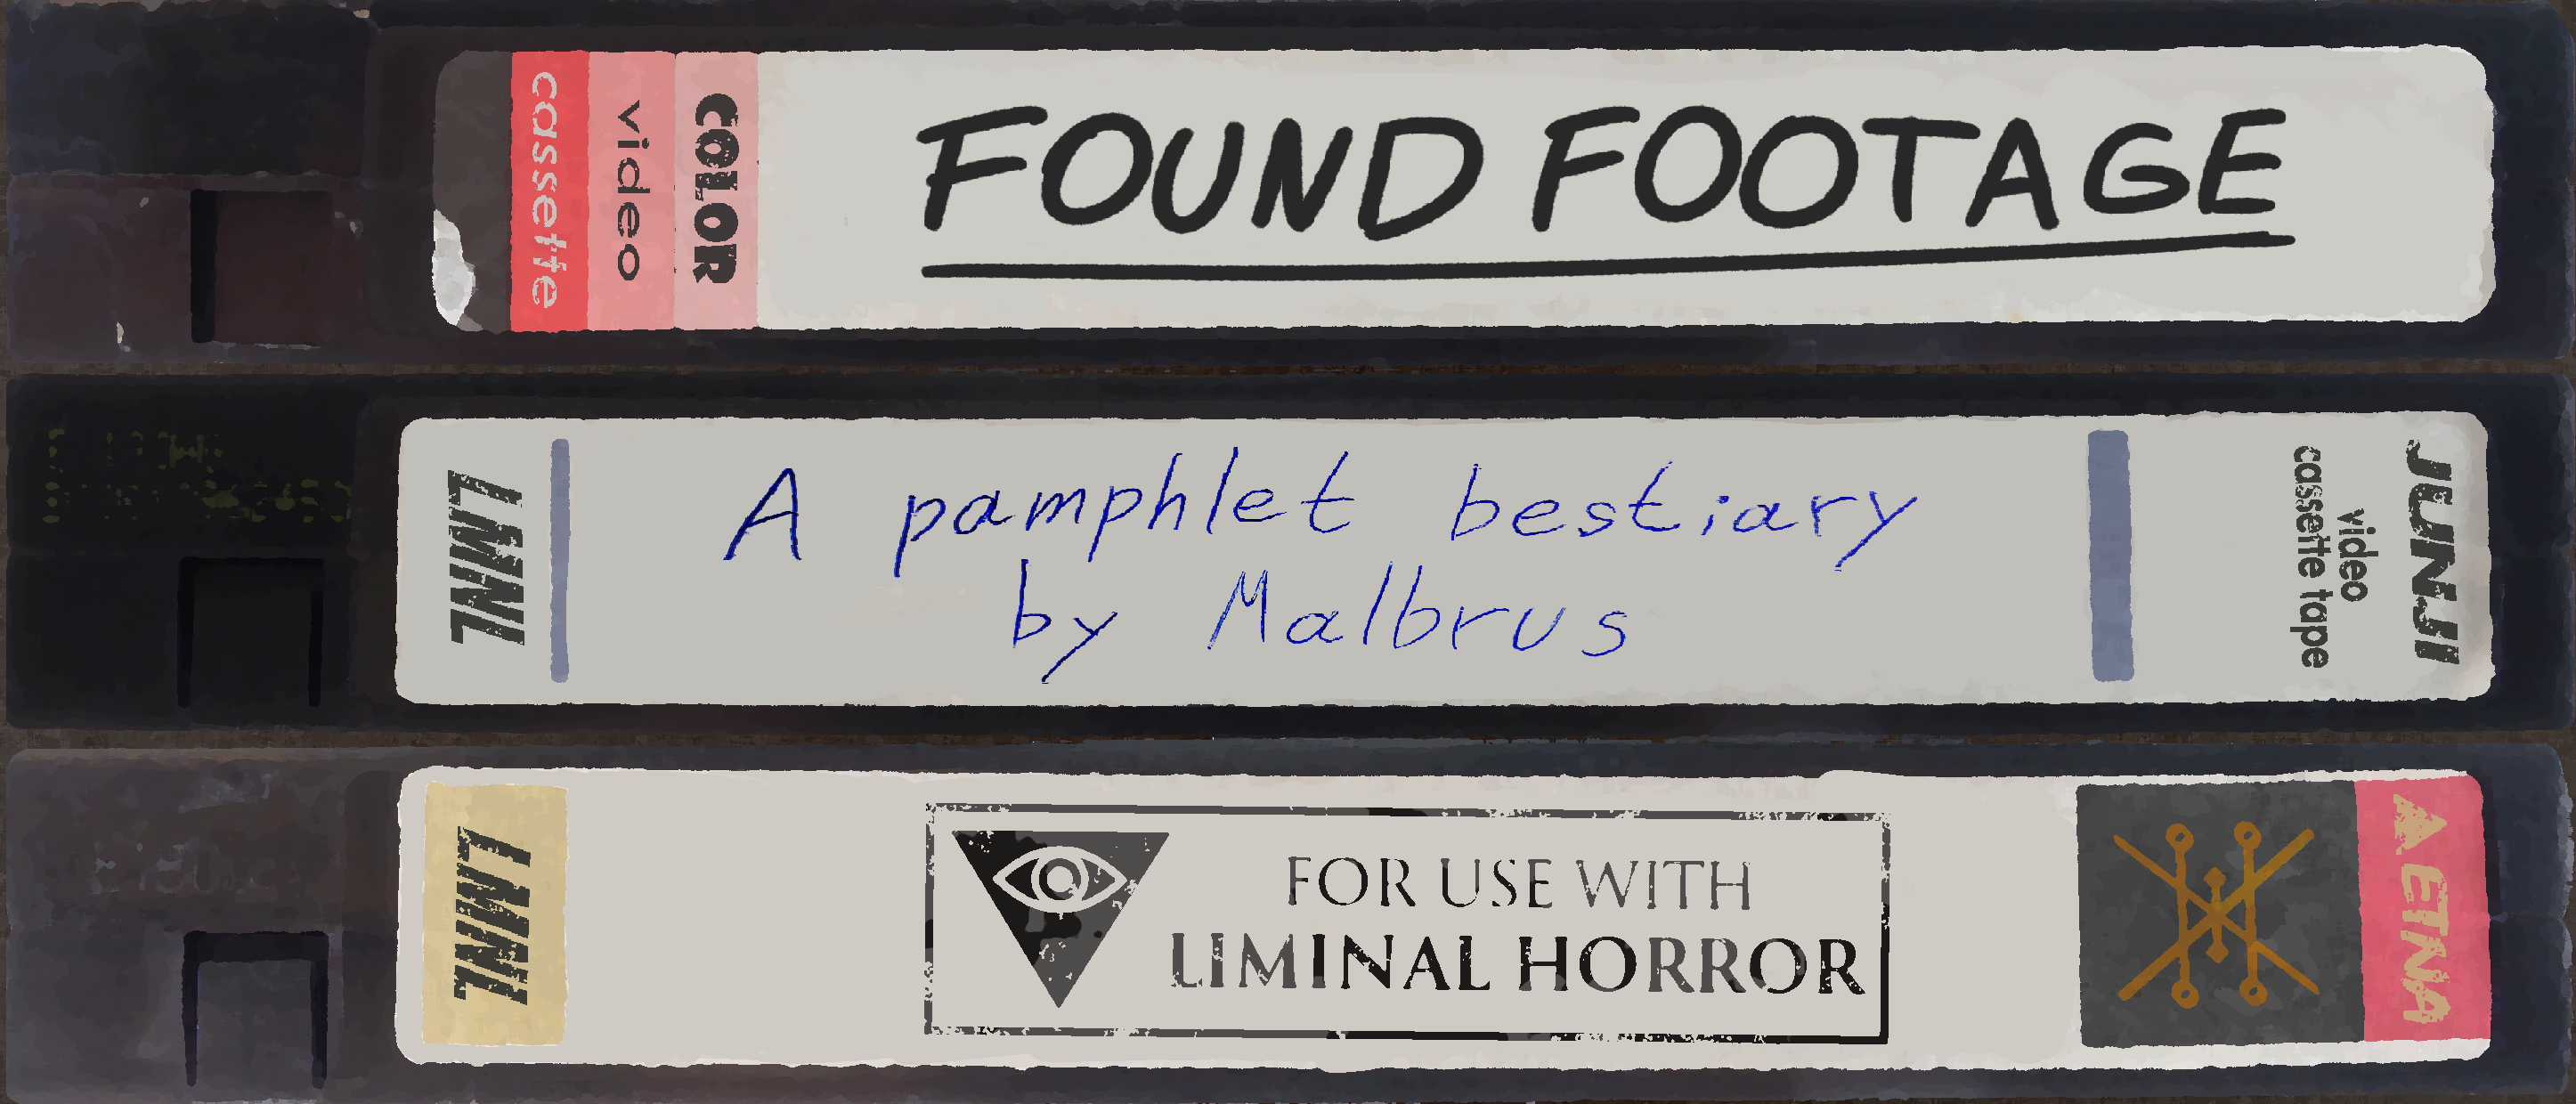 FOUND FOOTAGE: A Pamphlet Bestiary for Liminal Horror